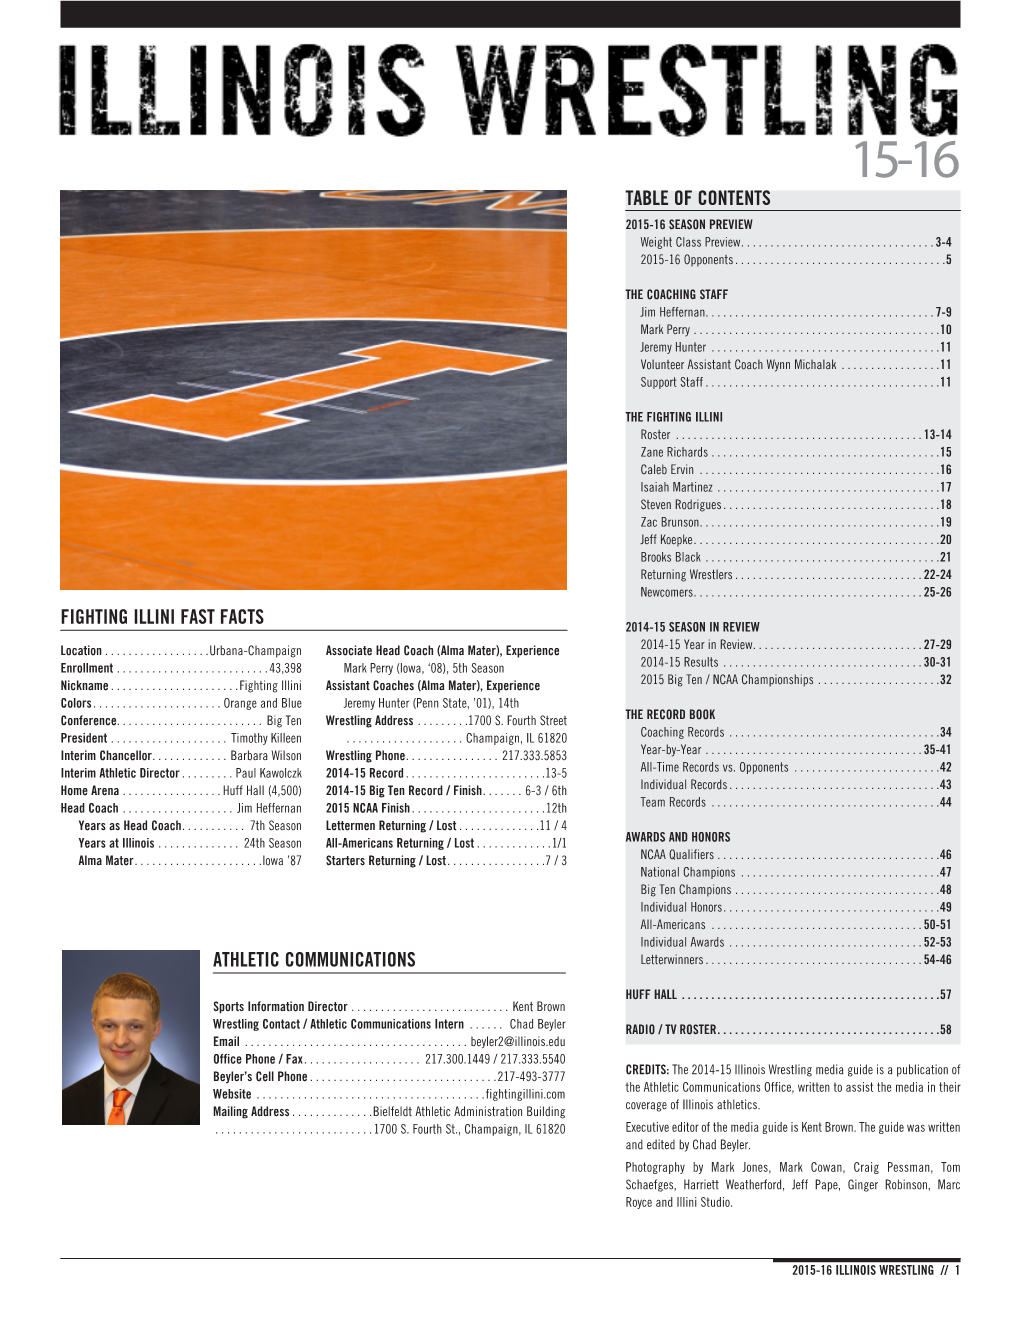 2008-09 Season Preview Table of Contents Fighting Illini